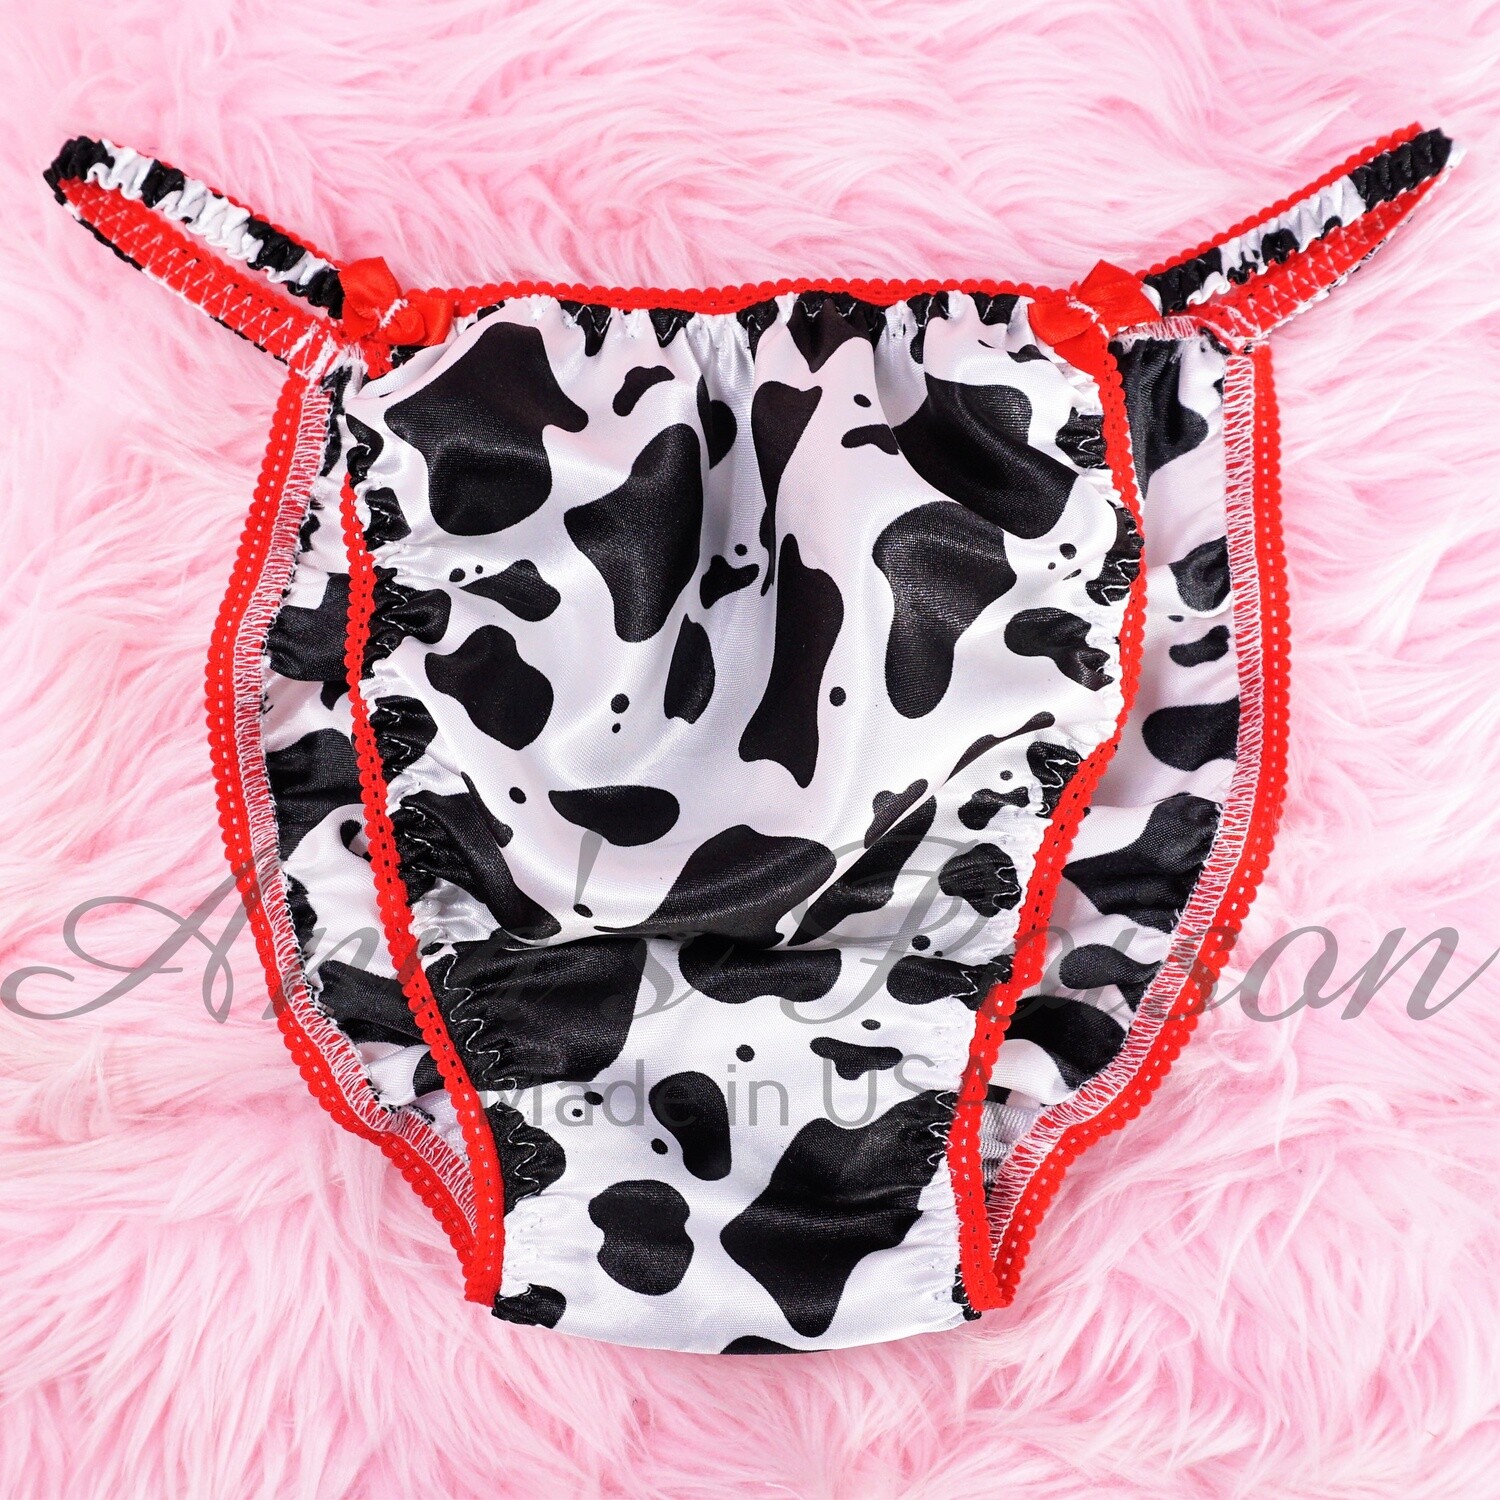 SAtin Panties in Ania's Poison Cut, sissy MENS collection pouch front Cow print Spring string bikini panties